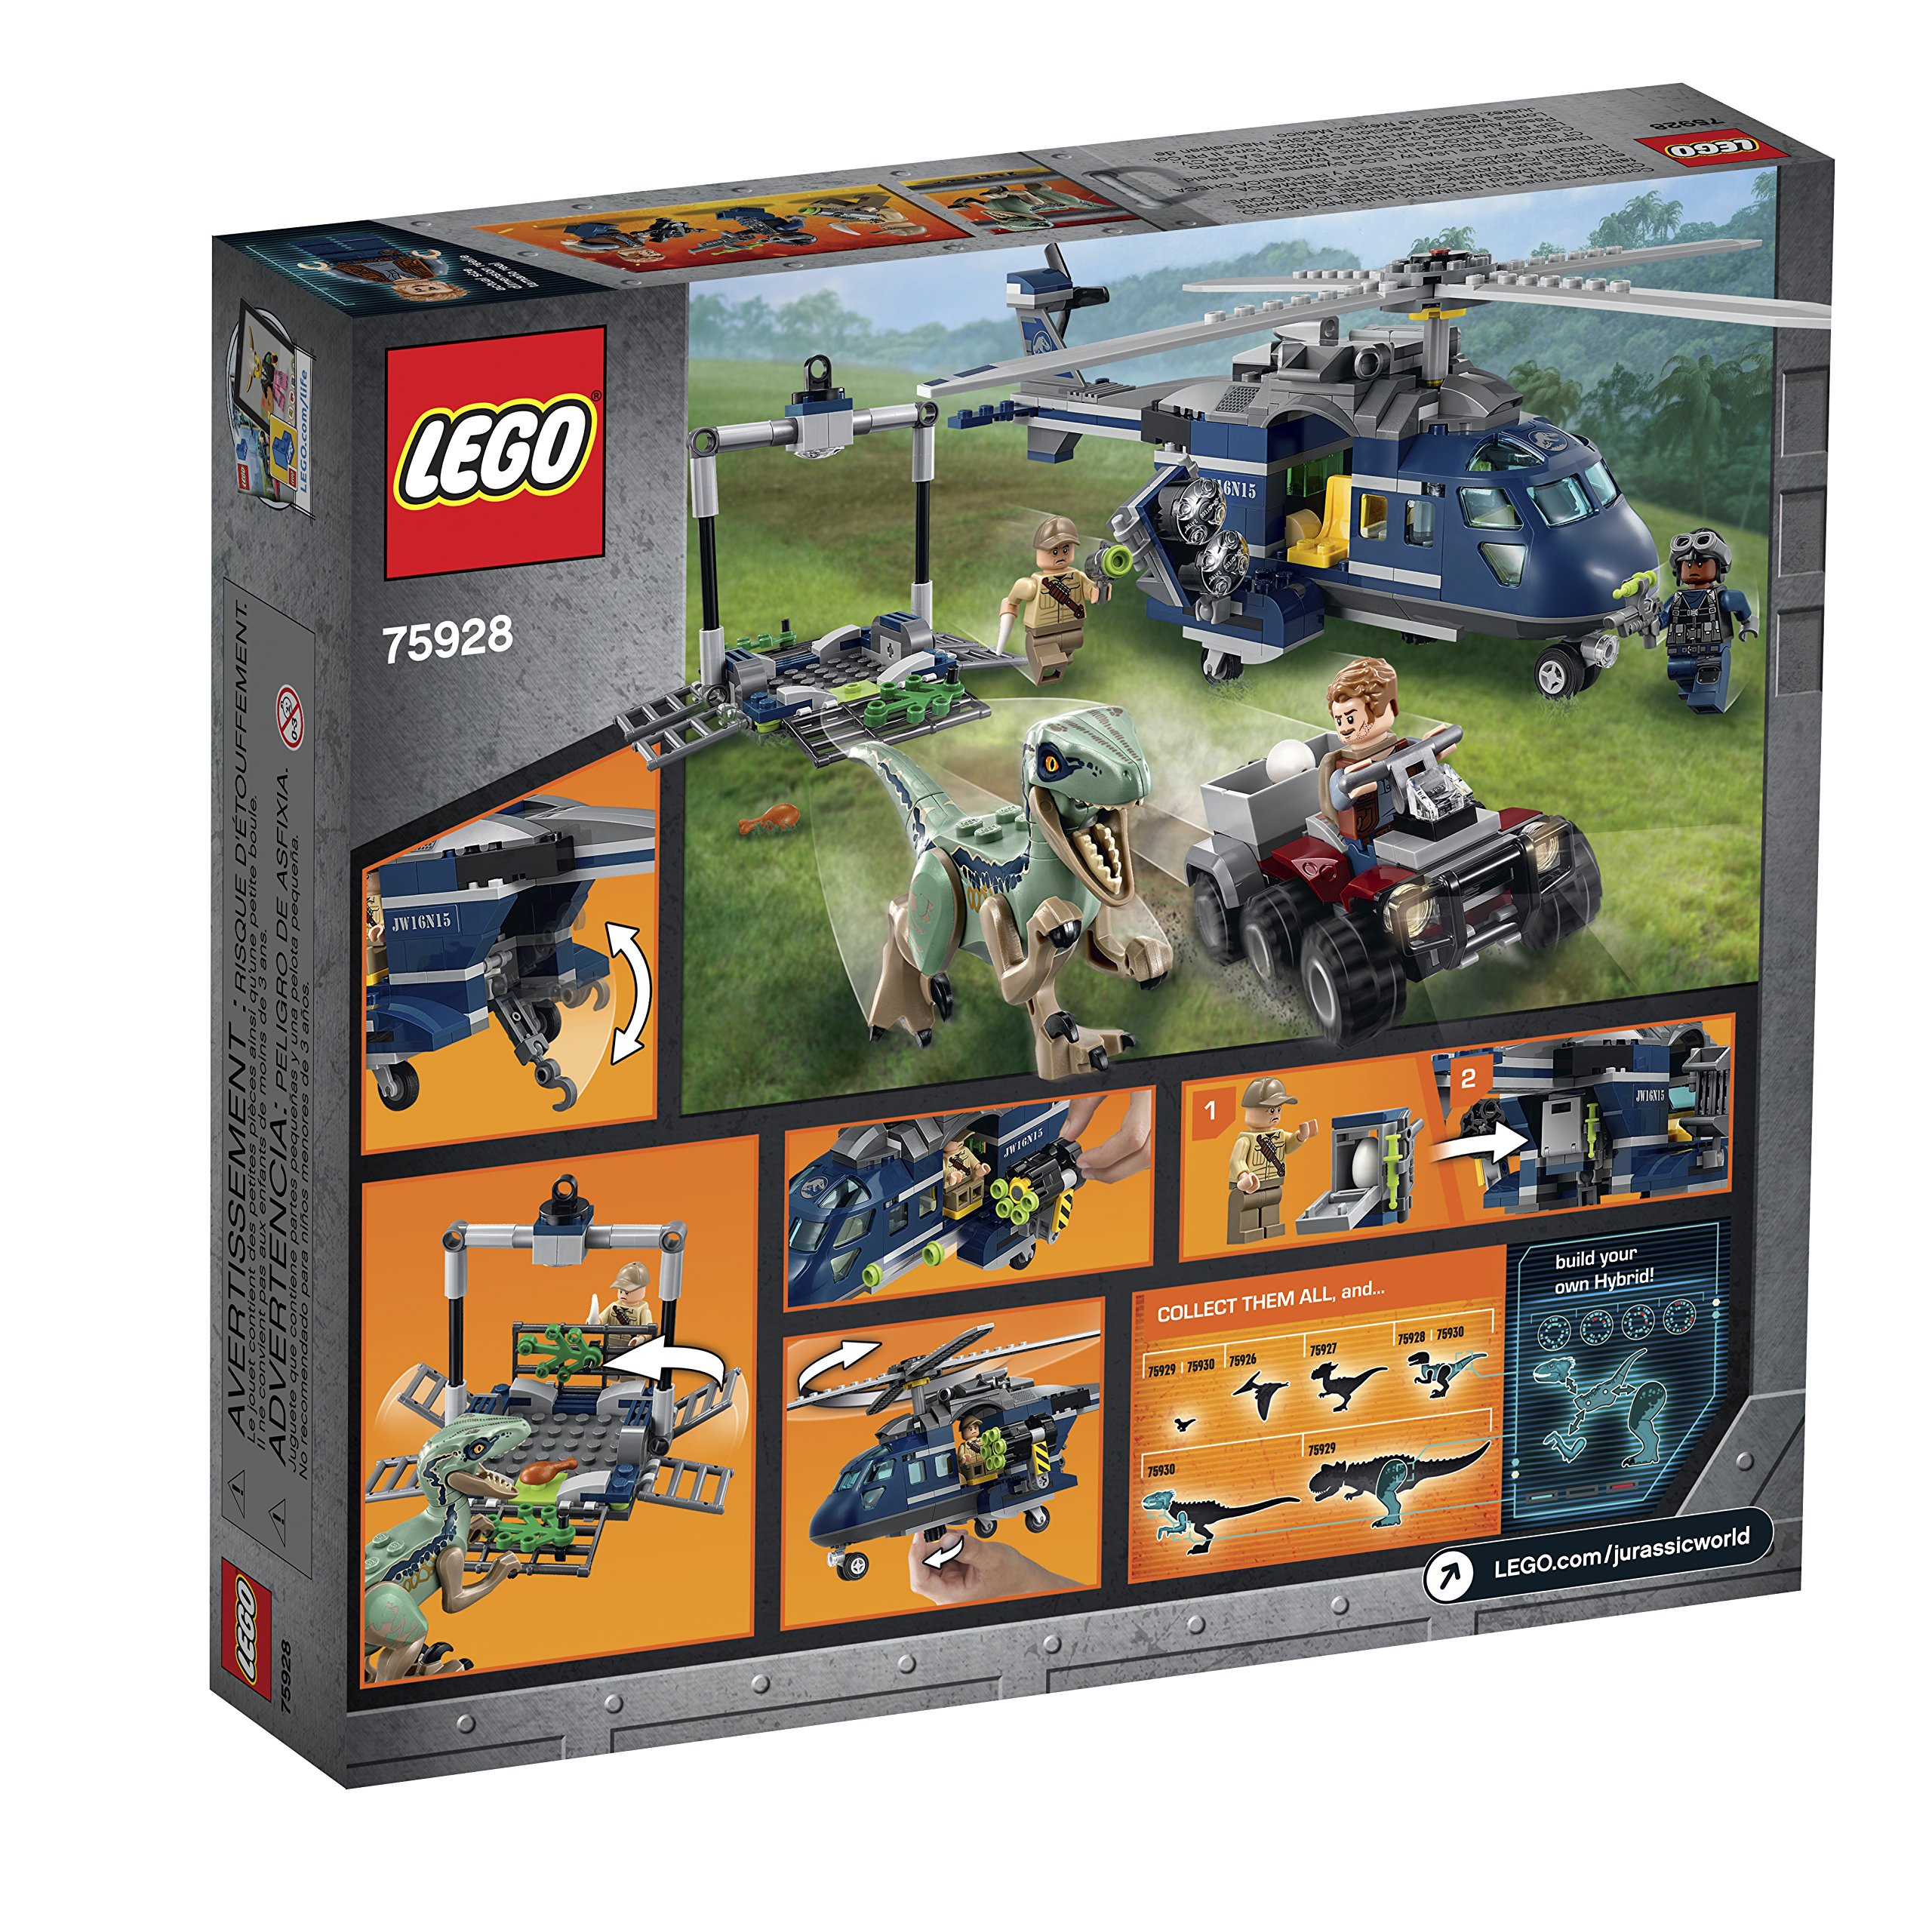 LEGO Jurassic World Blue's Helicopter Pursuit 75928 Building Kit (397 Pieces)